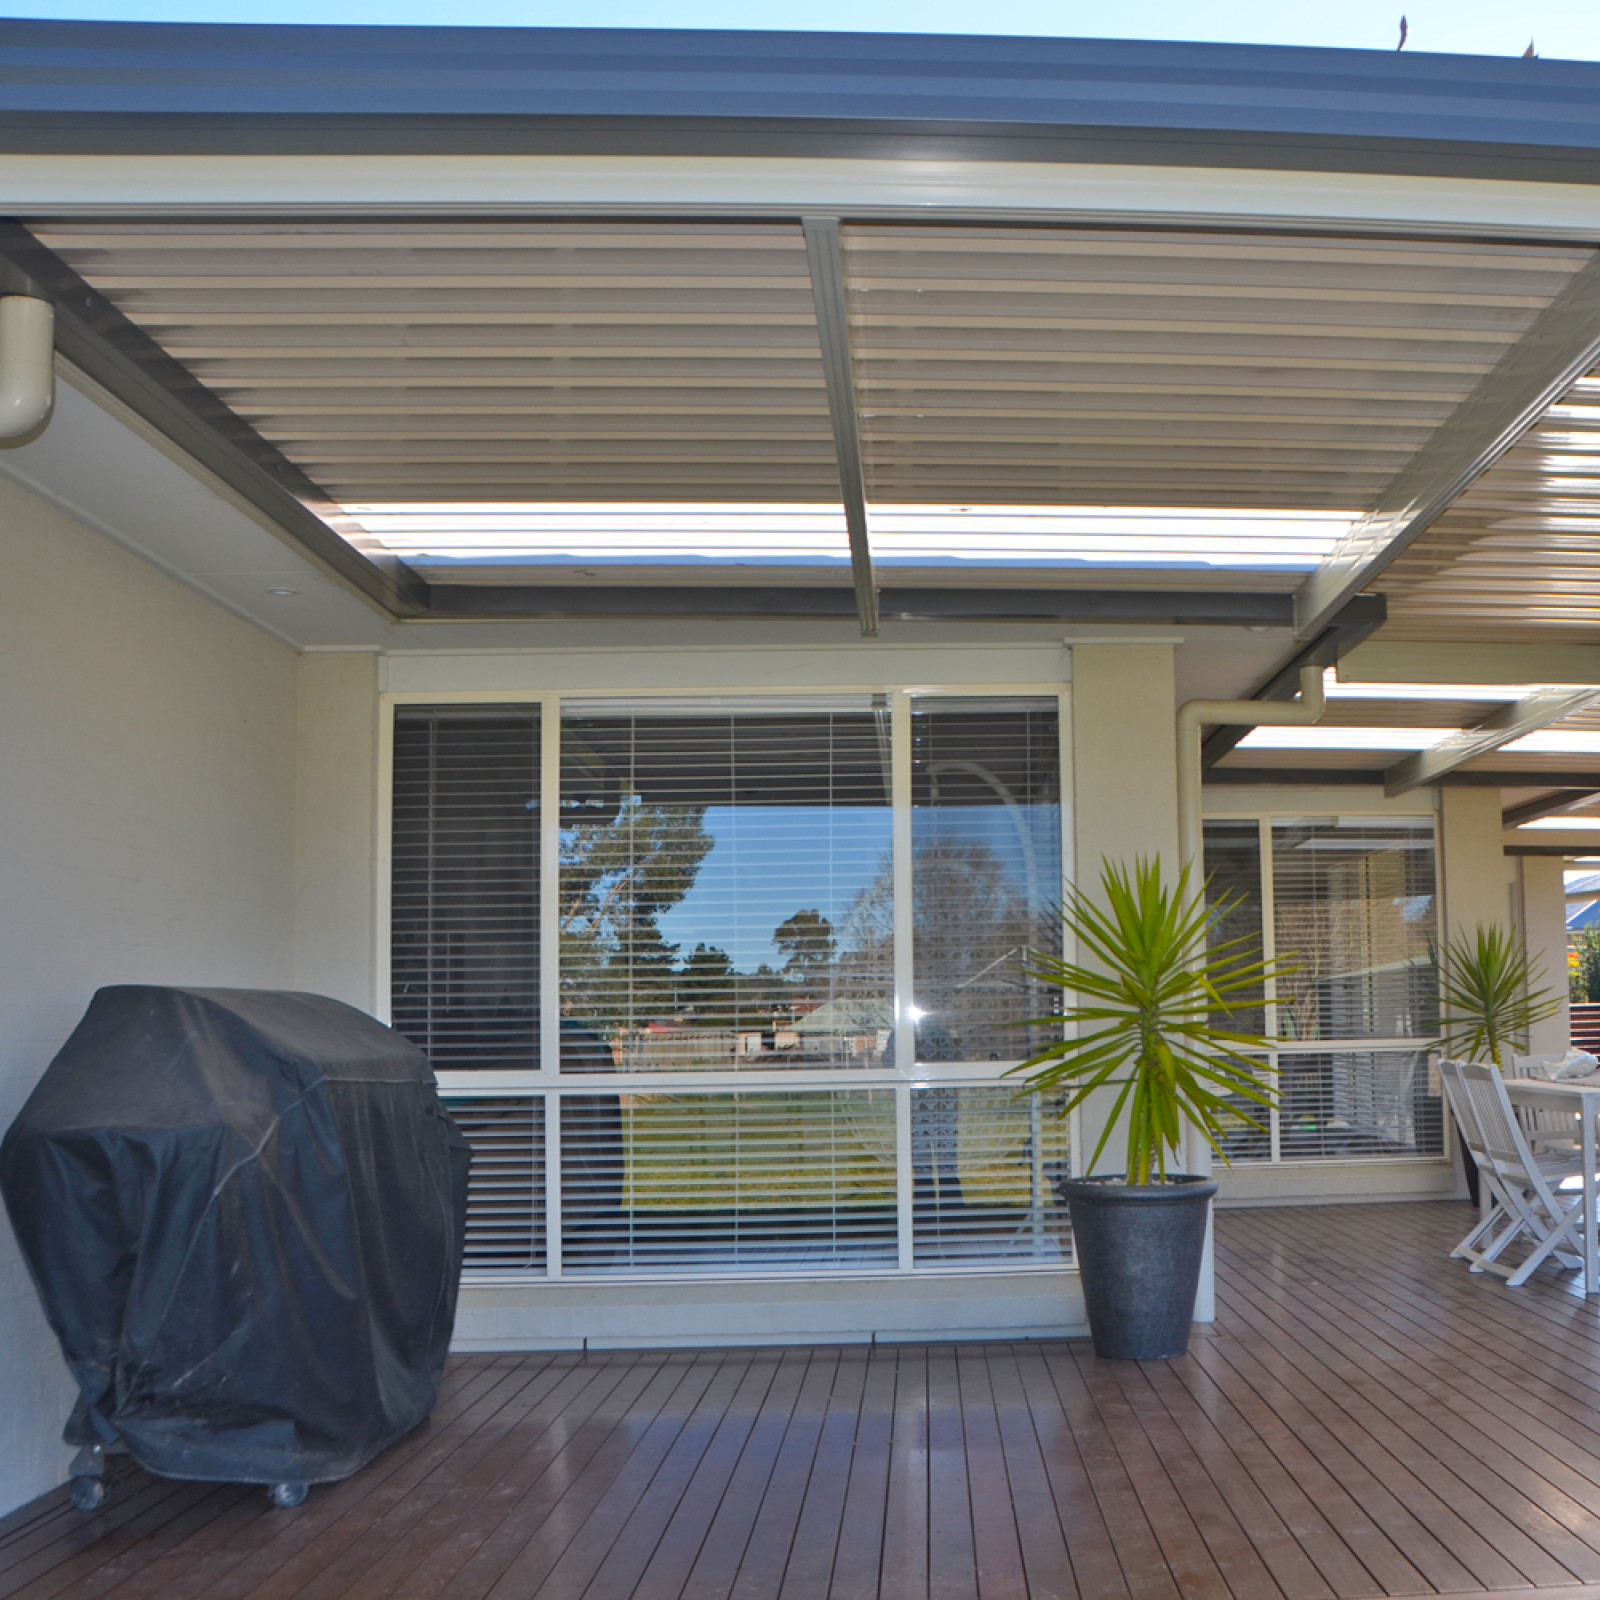 Flat roof patio with sunset panels and translucent panels wrap around timber deck